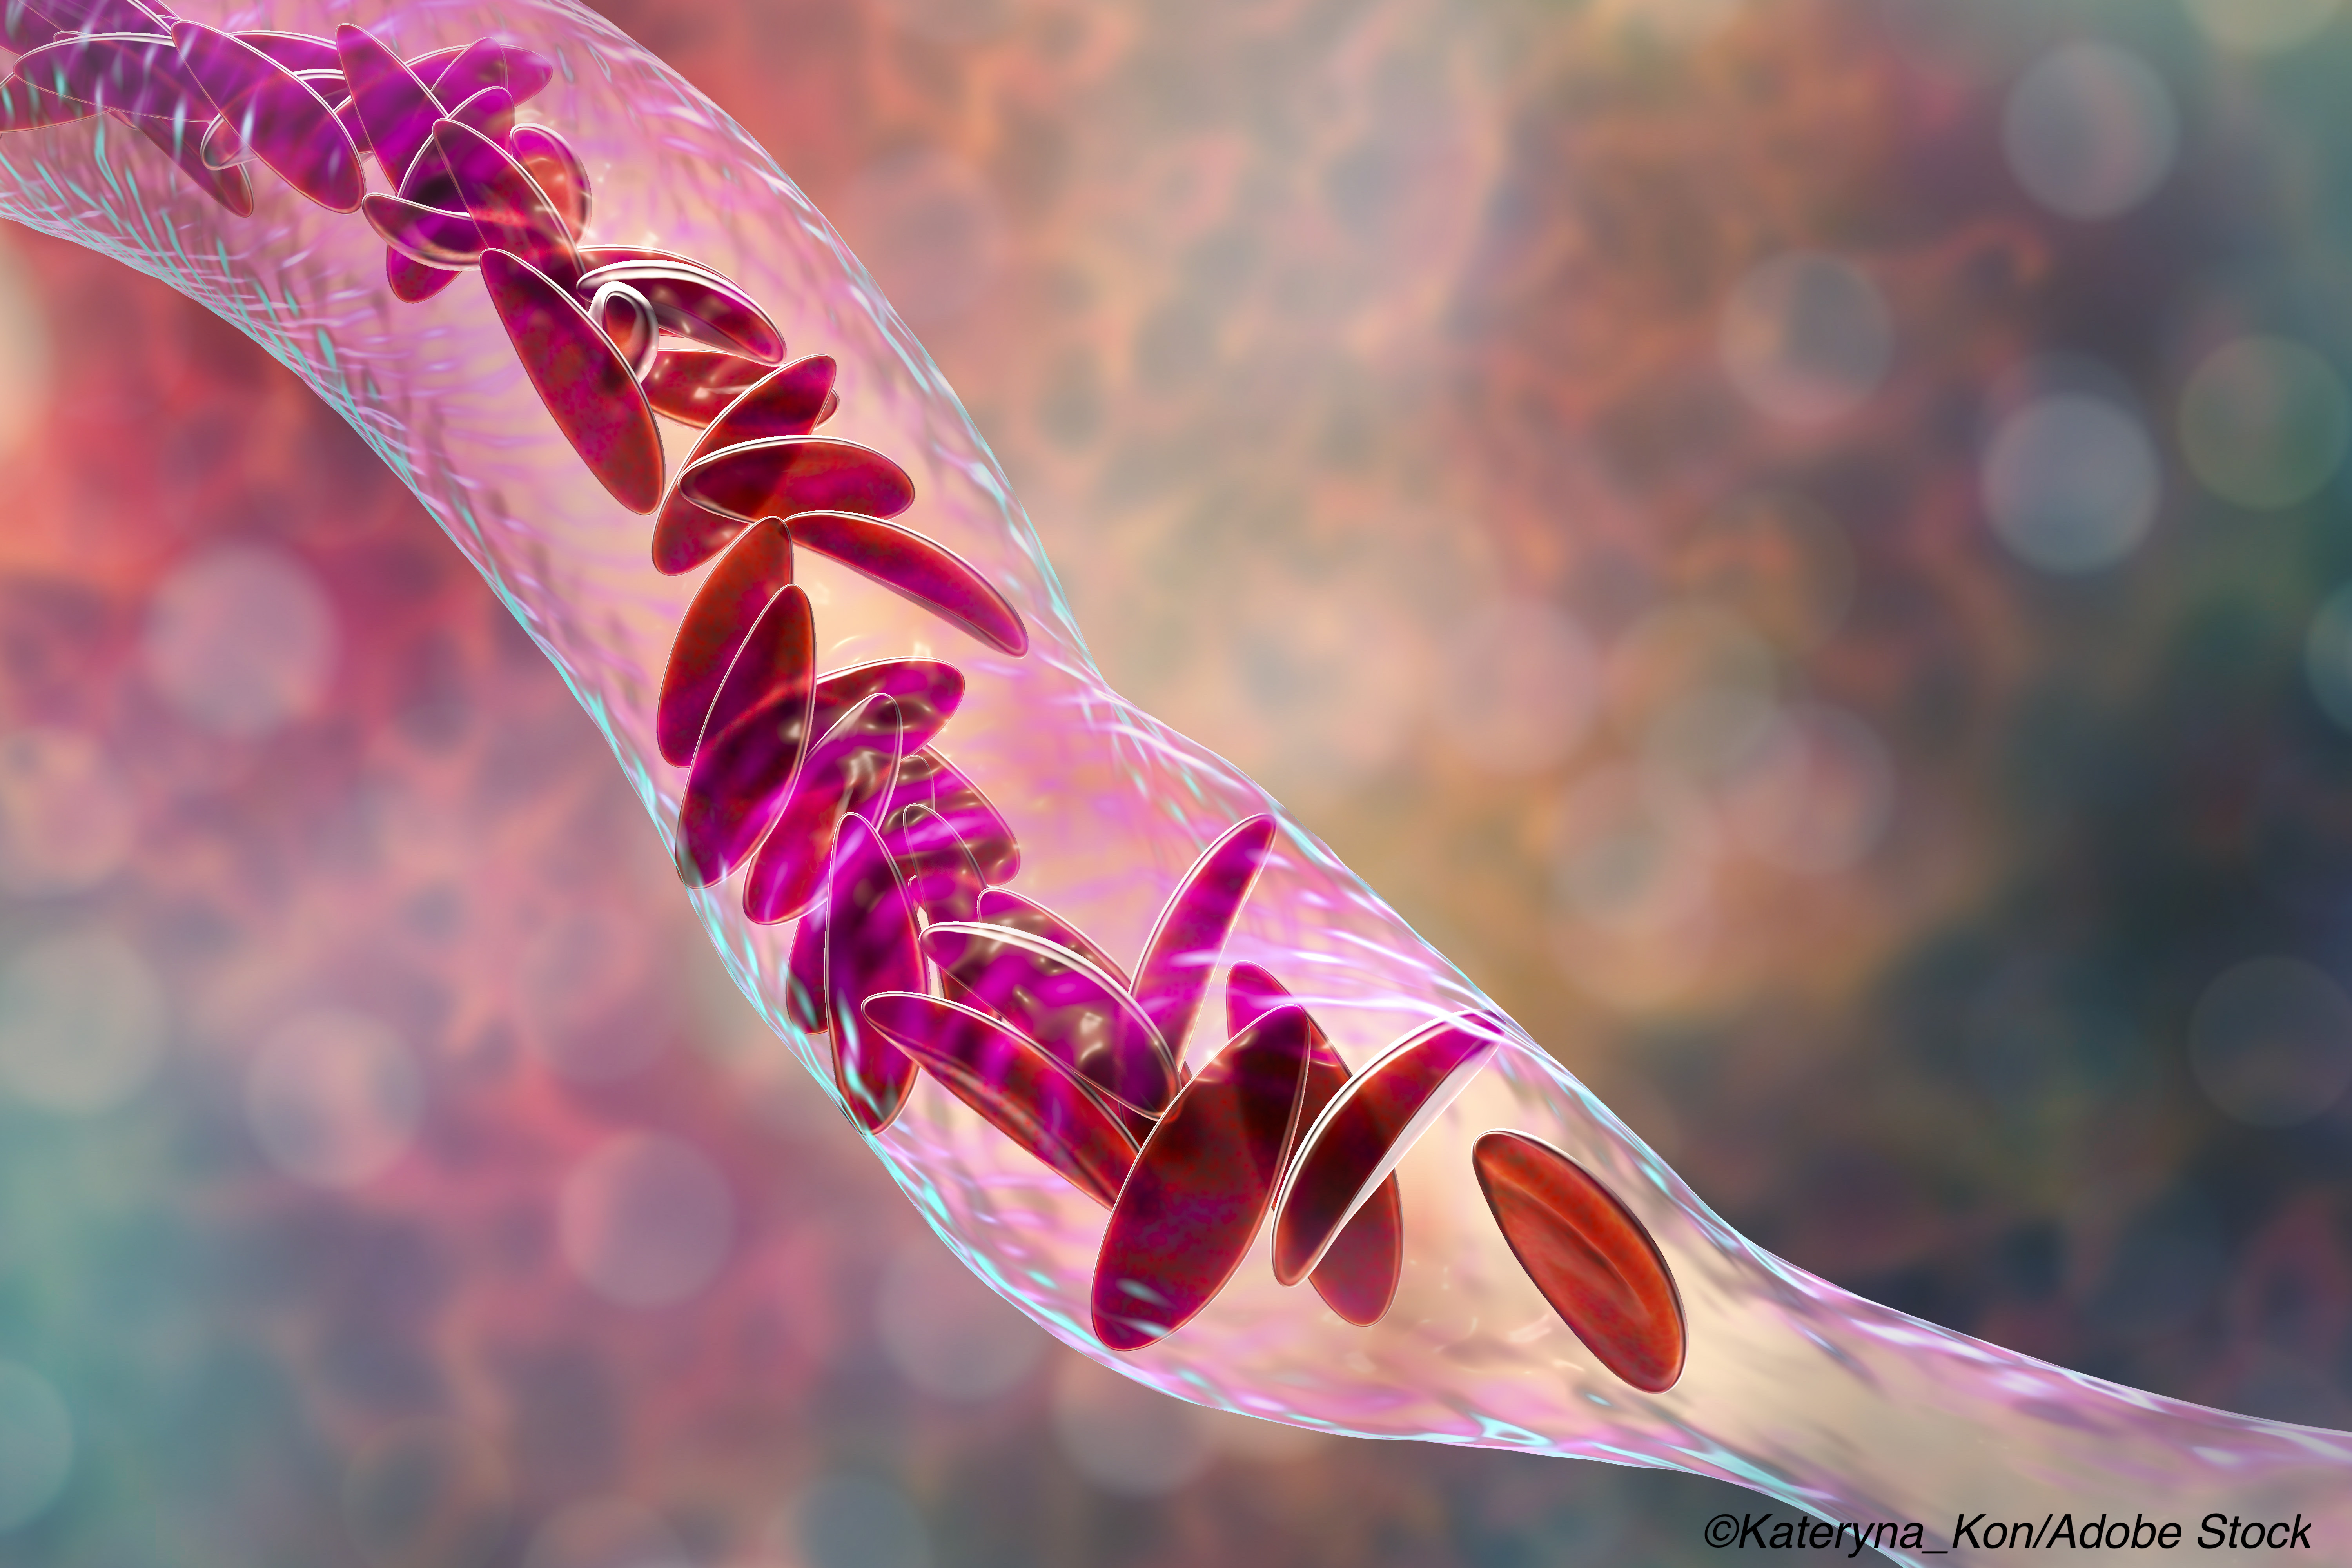 Misdirected Mitochondrial DNA May Trigger Inflammation in Sickle Cell Disease